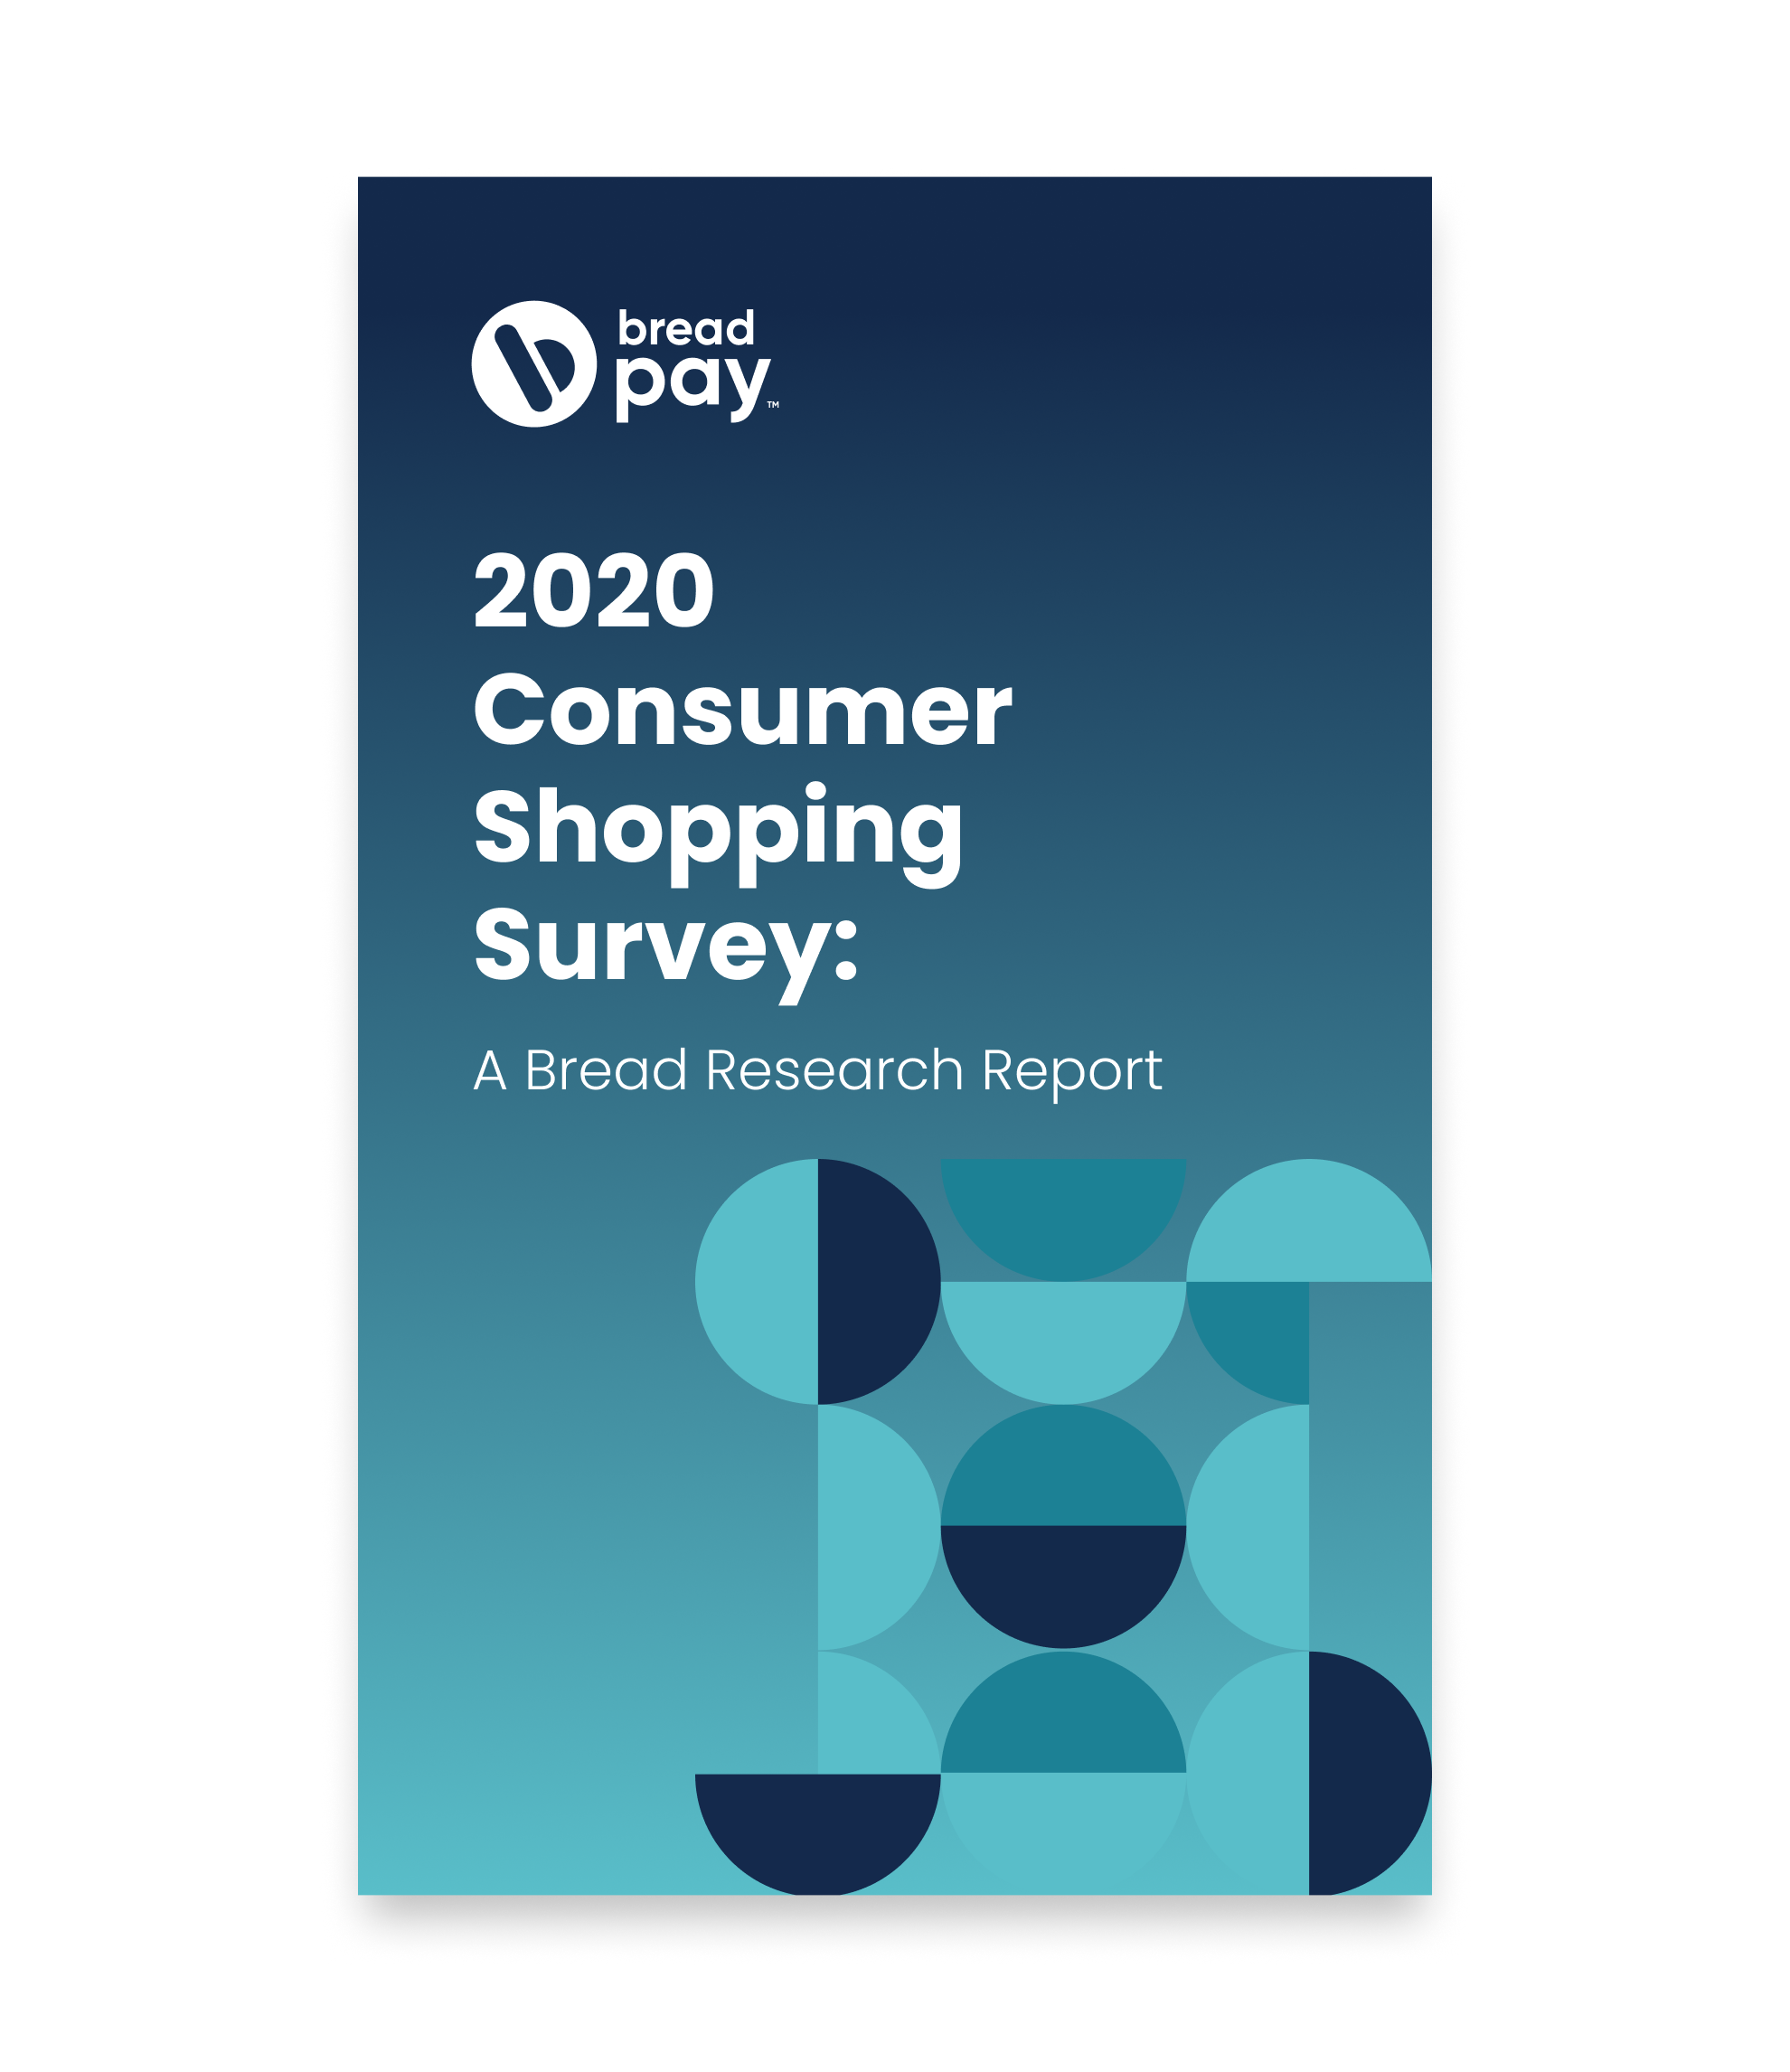 2020 Consumer Shopping Survey: A Bread Research Report